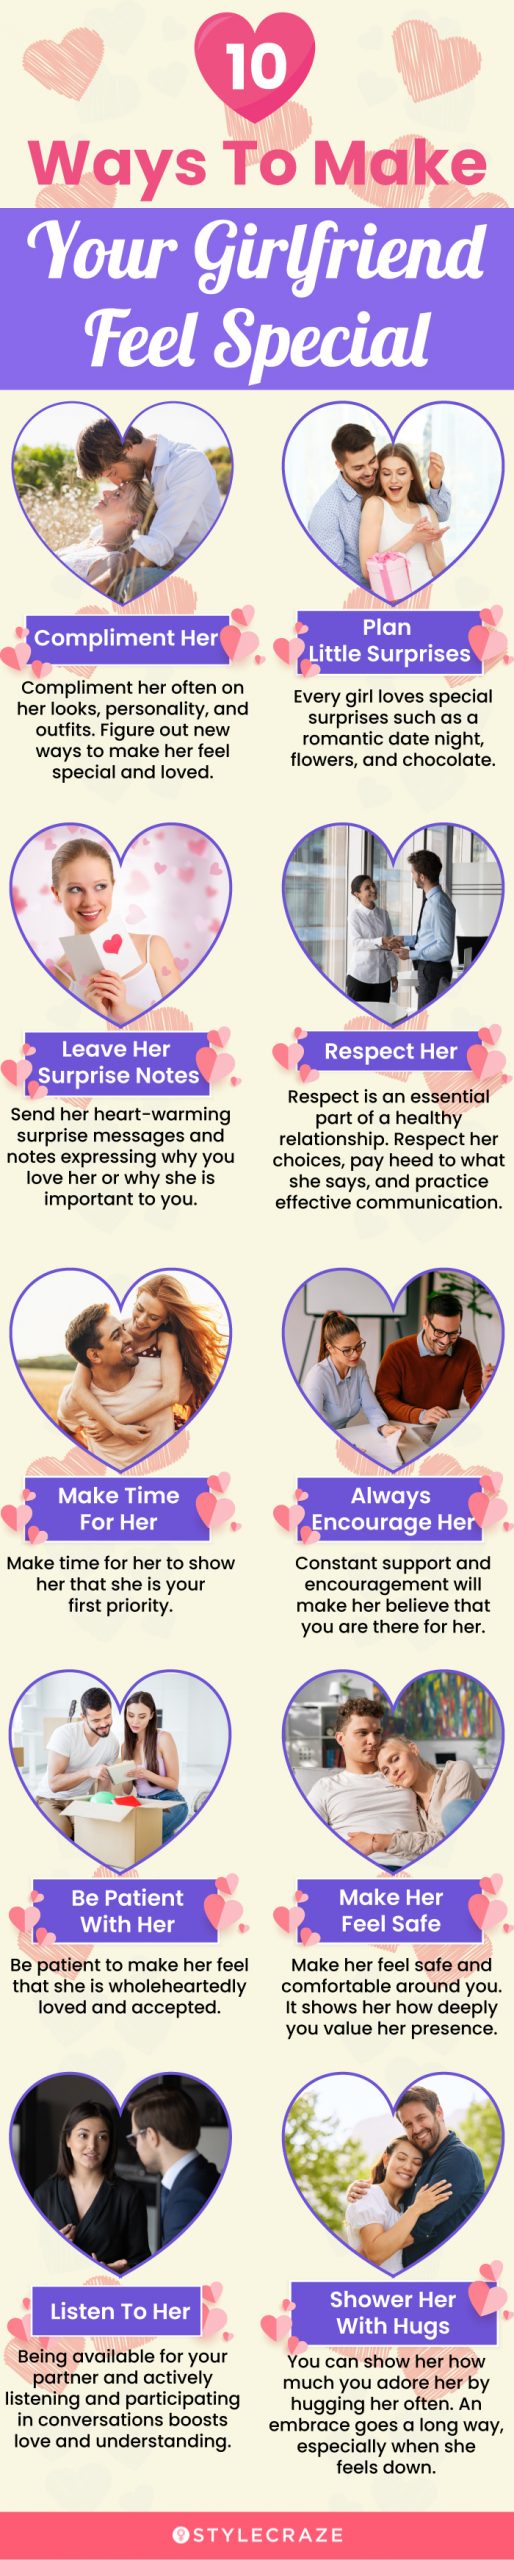 10 ways to make your girlfriend feel special (infographic)